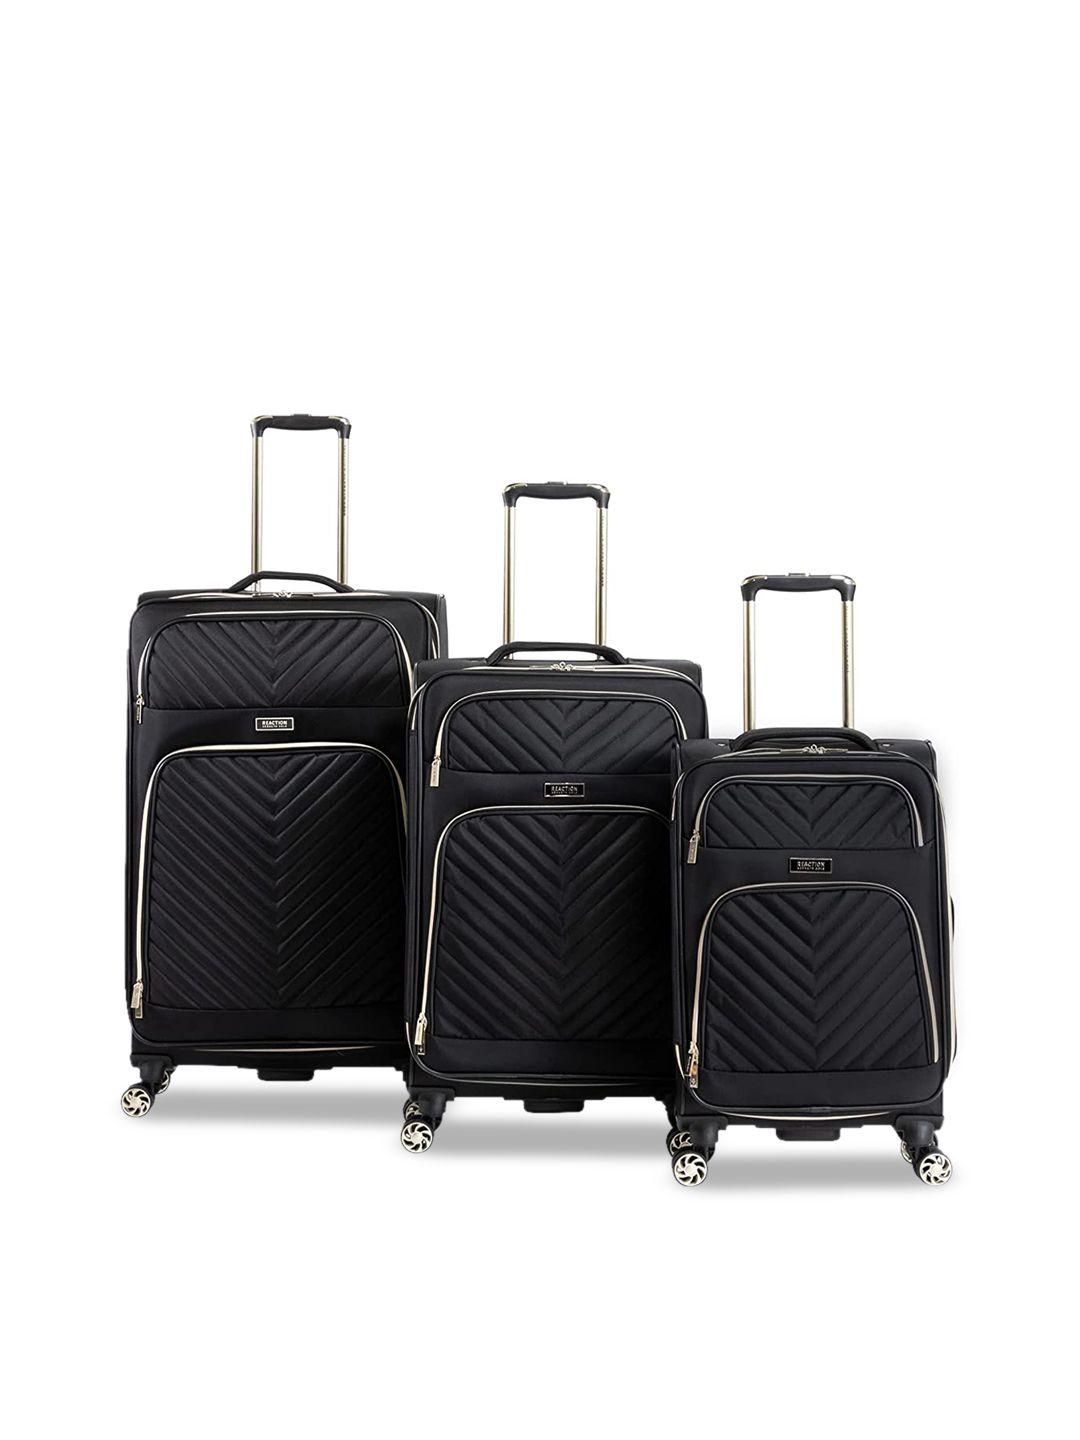 kenneth-cole-set-of-3-textured-soft-sided-trolley-bags